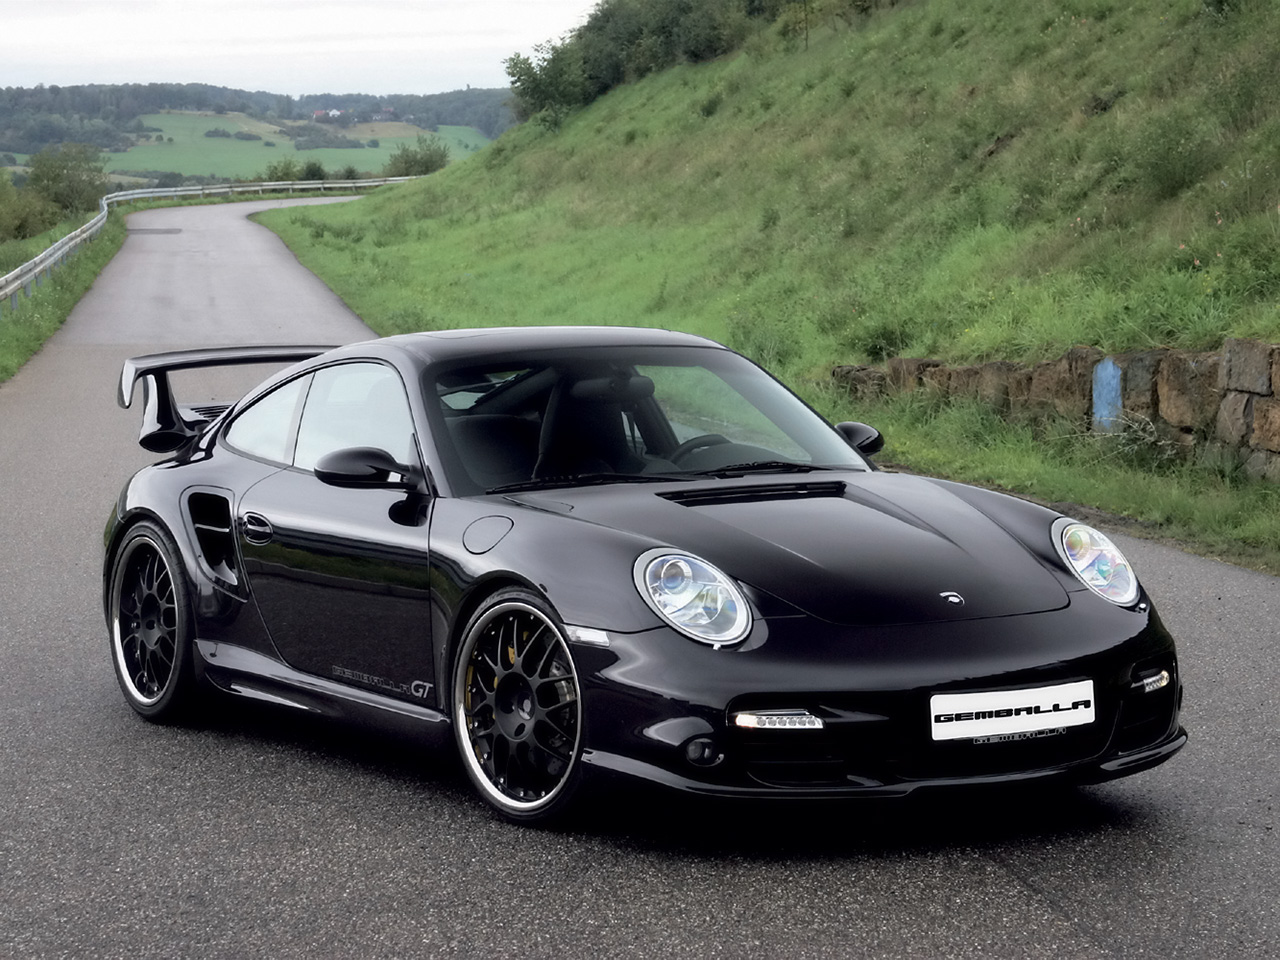 2007-Gemballa-Turbo-GT-550-based-on-Porsche-997-Front-And-Side-1280x960.jpg